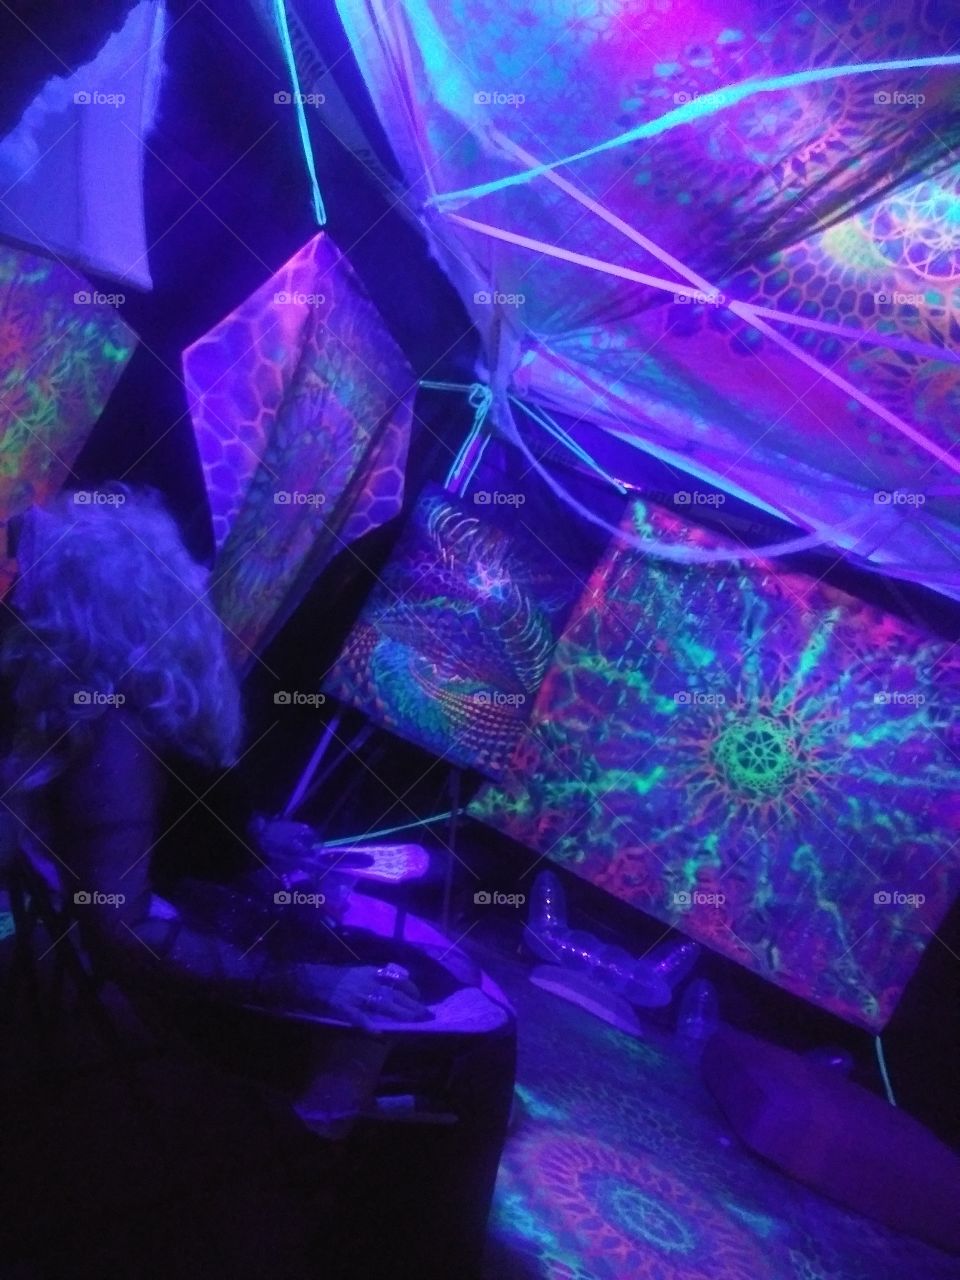 Future Witch Teleportation. At a Halloween party, a lone witch relaxes and gazes through the psychedelic scene of art around her, brought to a different kind of life under a blacklight. She is going places in her mind.